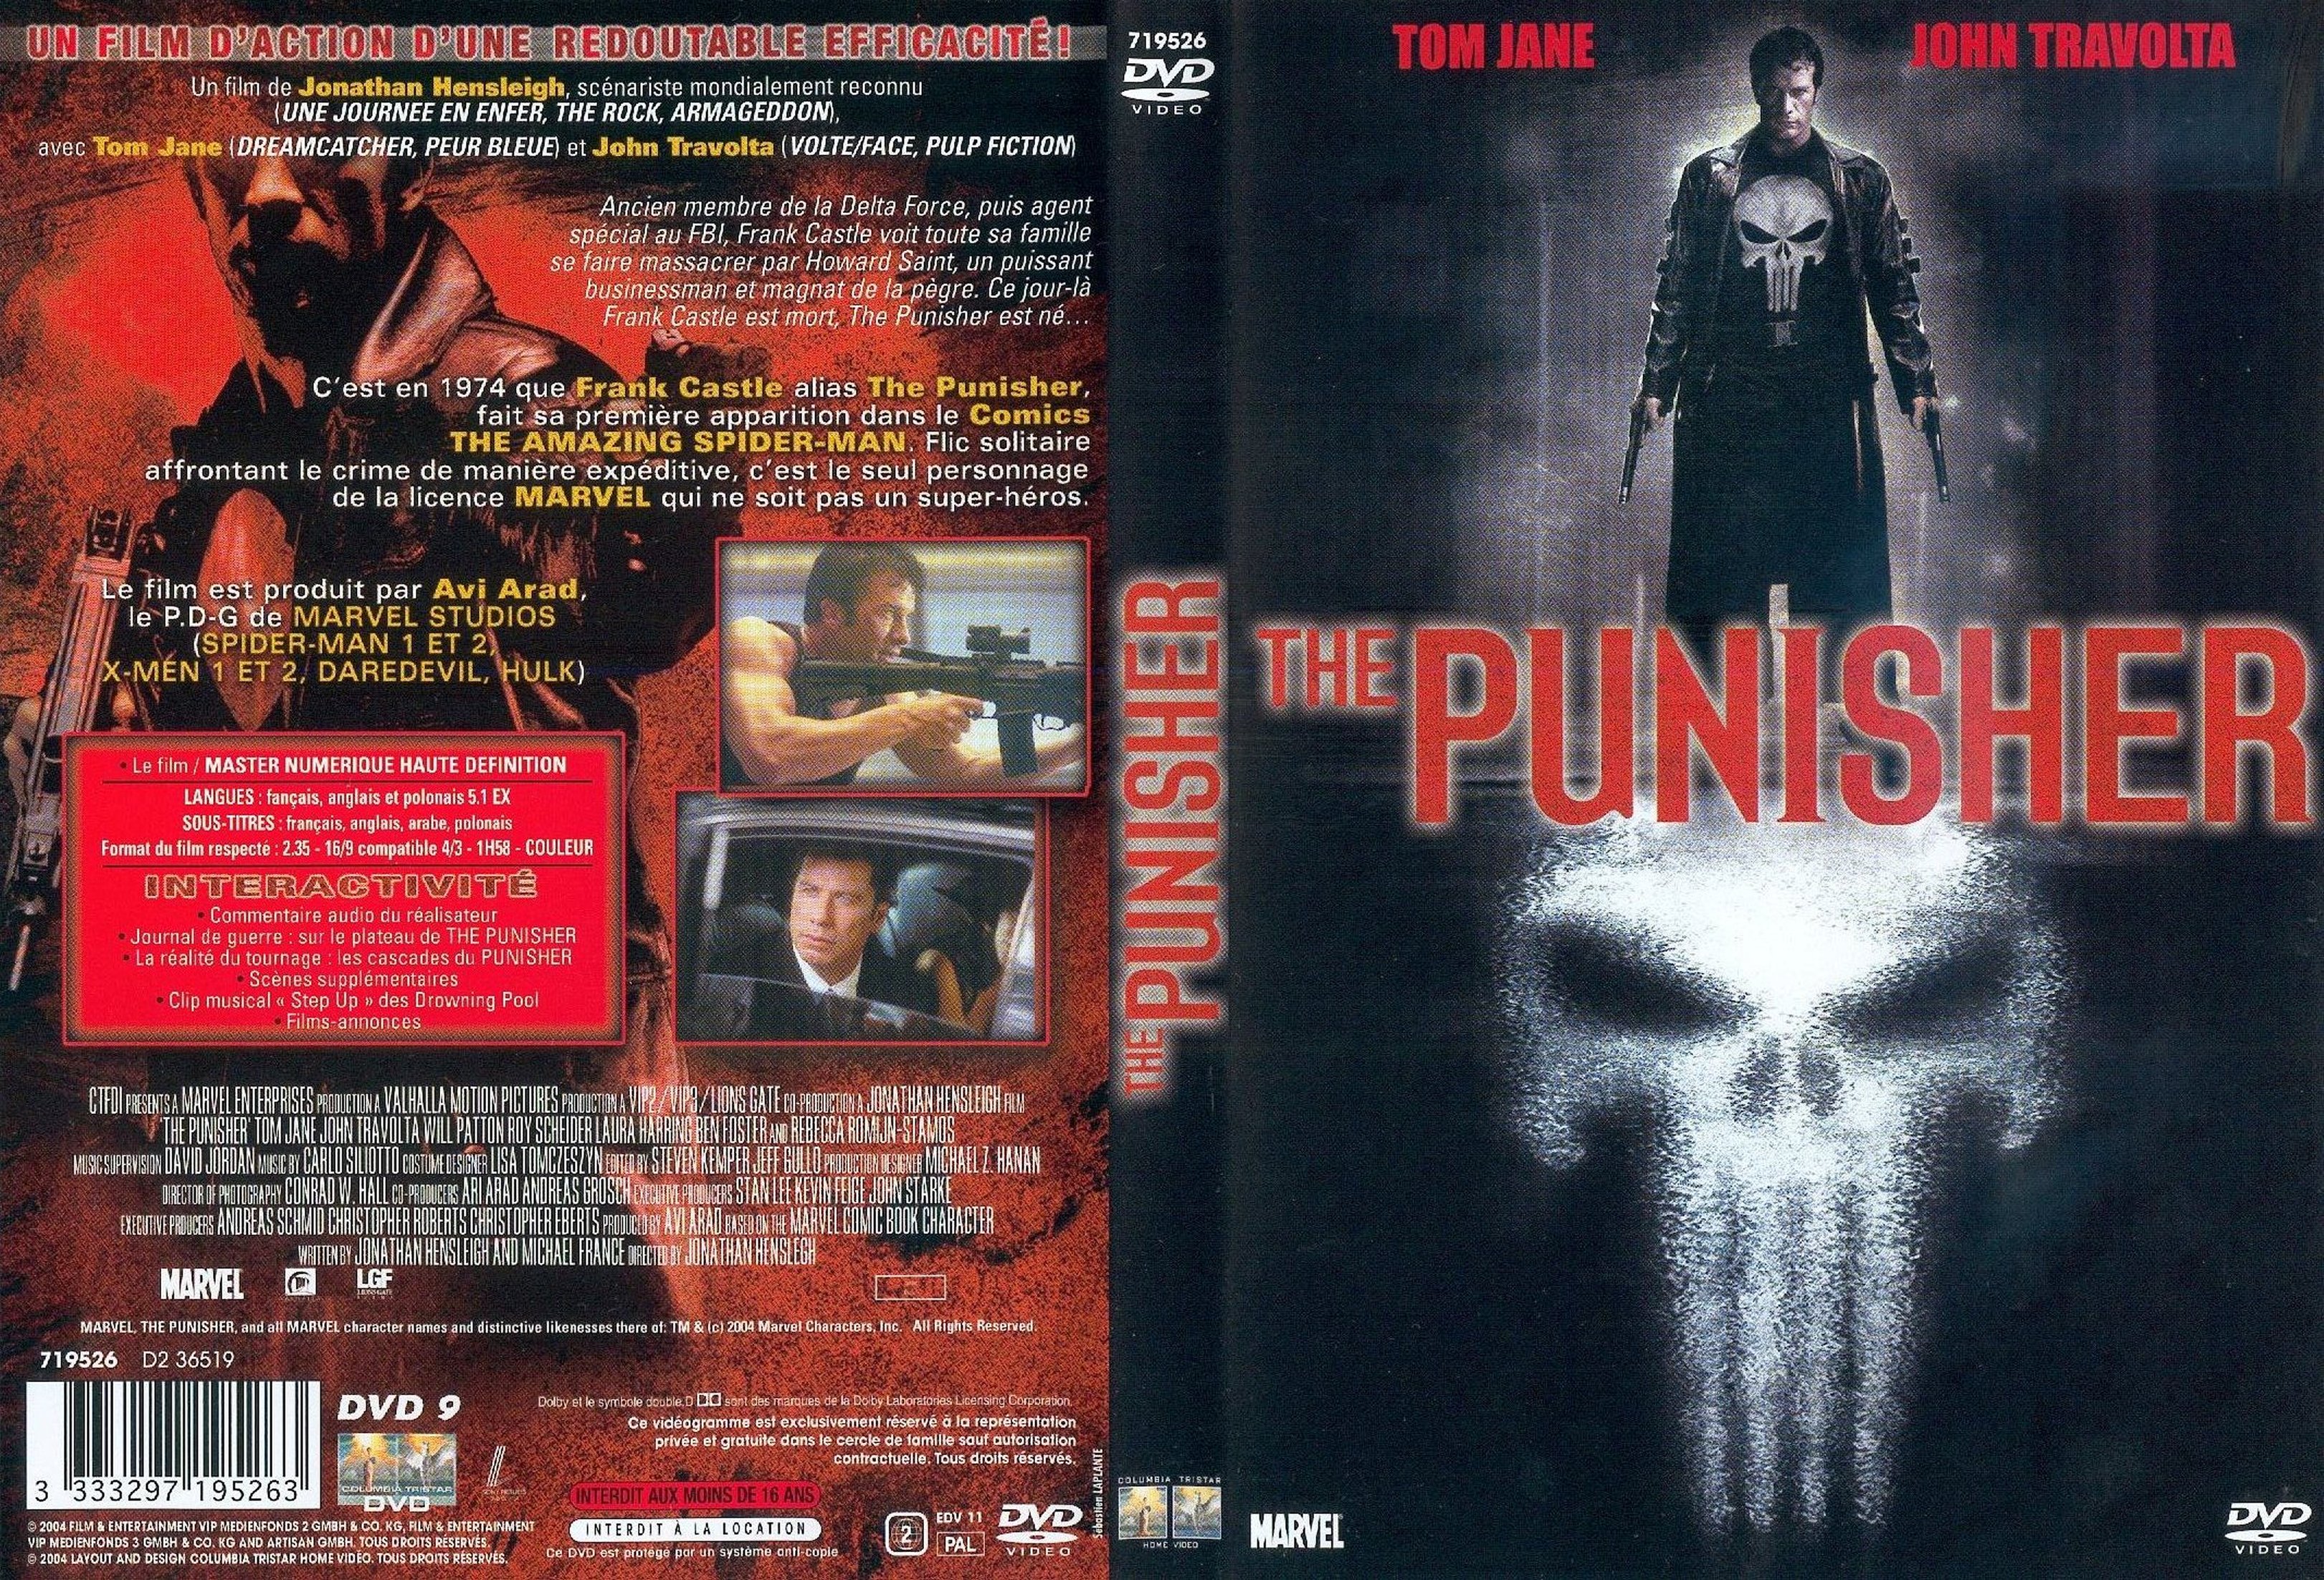 Jaquette DVD The punisher